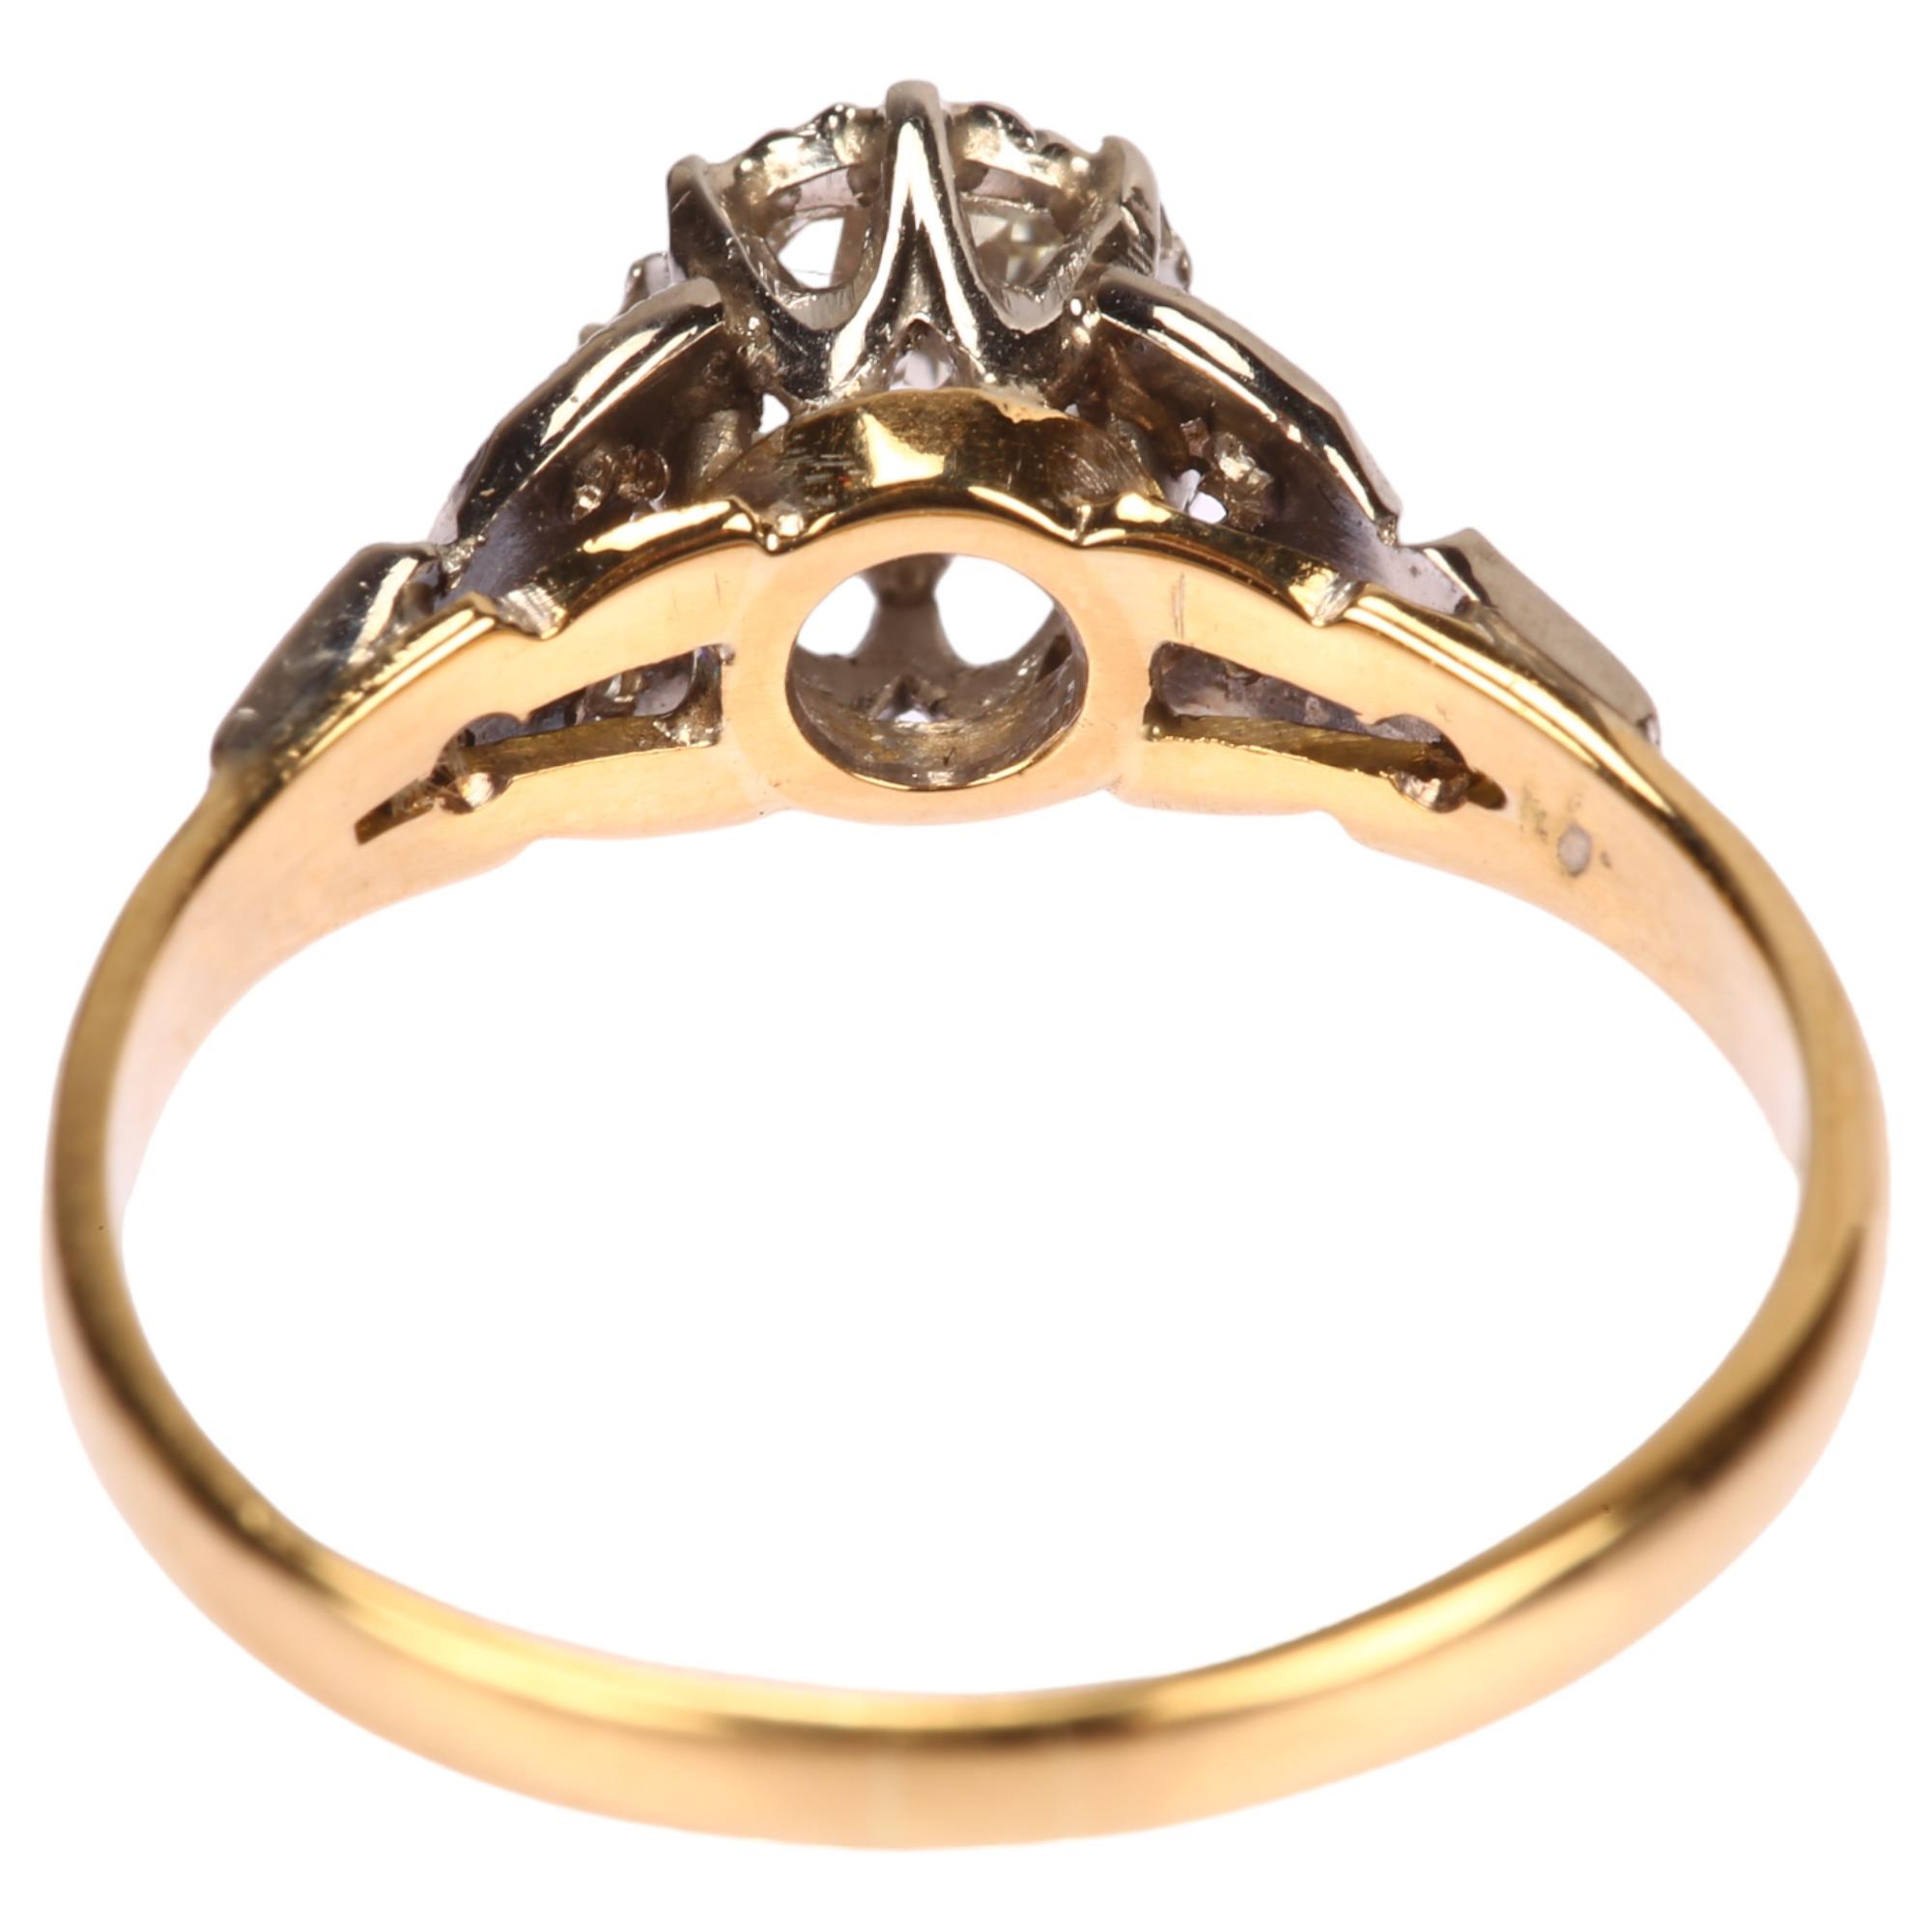 An 18ct gold 0.3ct solitaire diamond ring, platinum-topped illusion set with old European-cut - Image 3 of 4